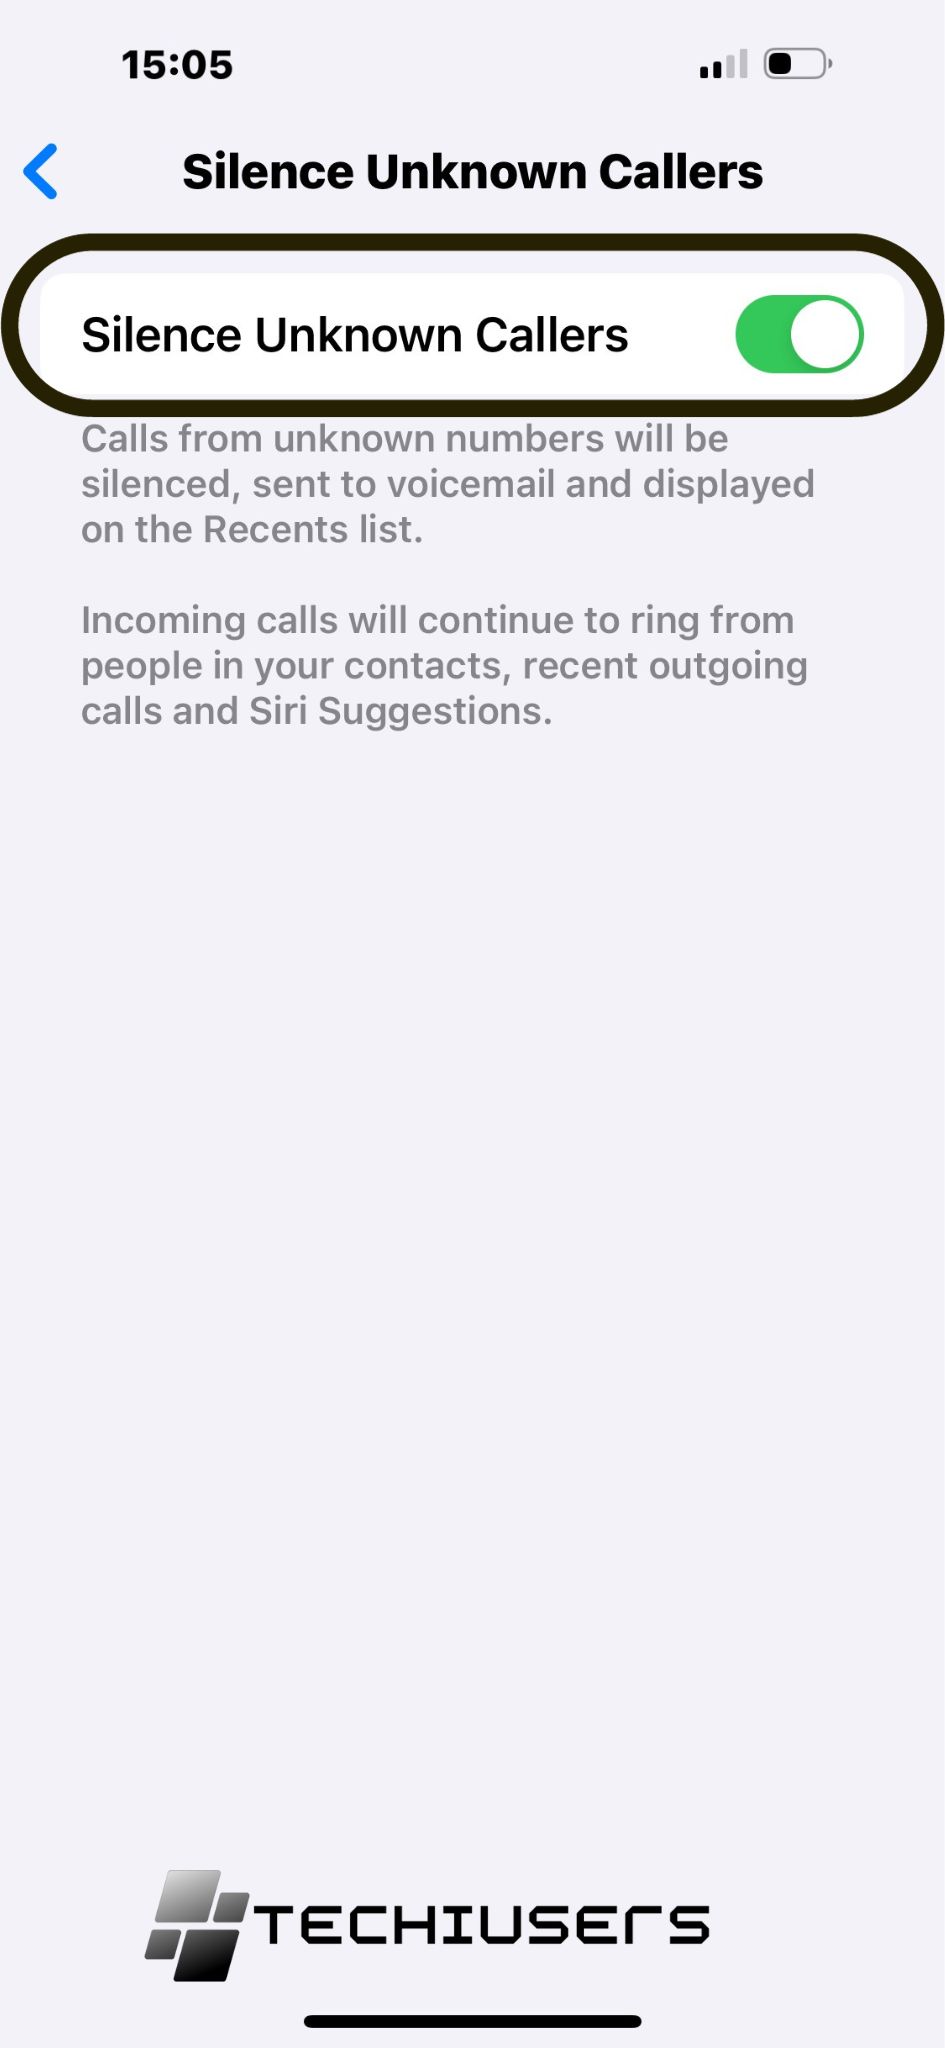 Toggle the switch next to "Silence Unknown Callers" to the on (green) position